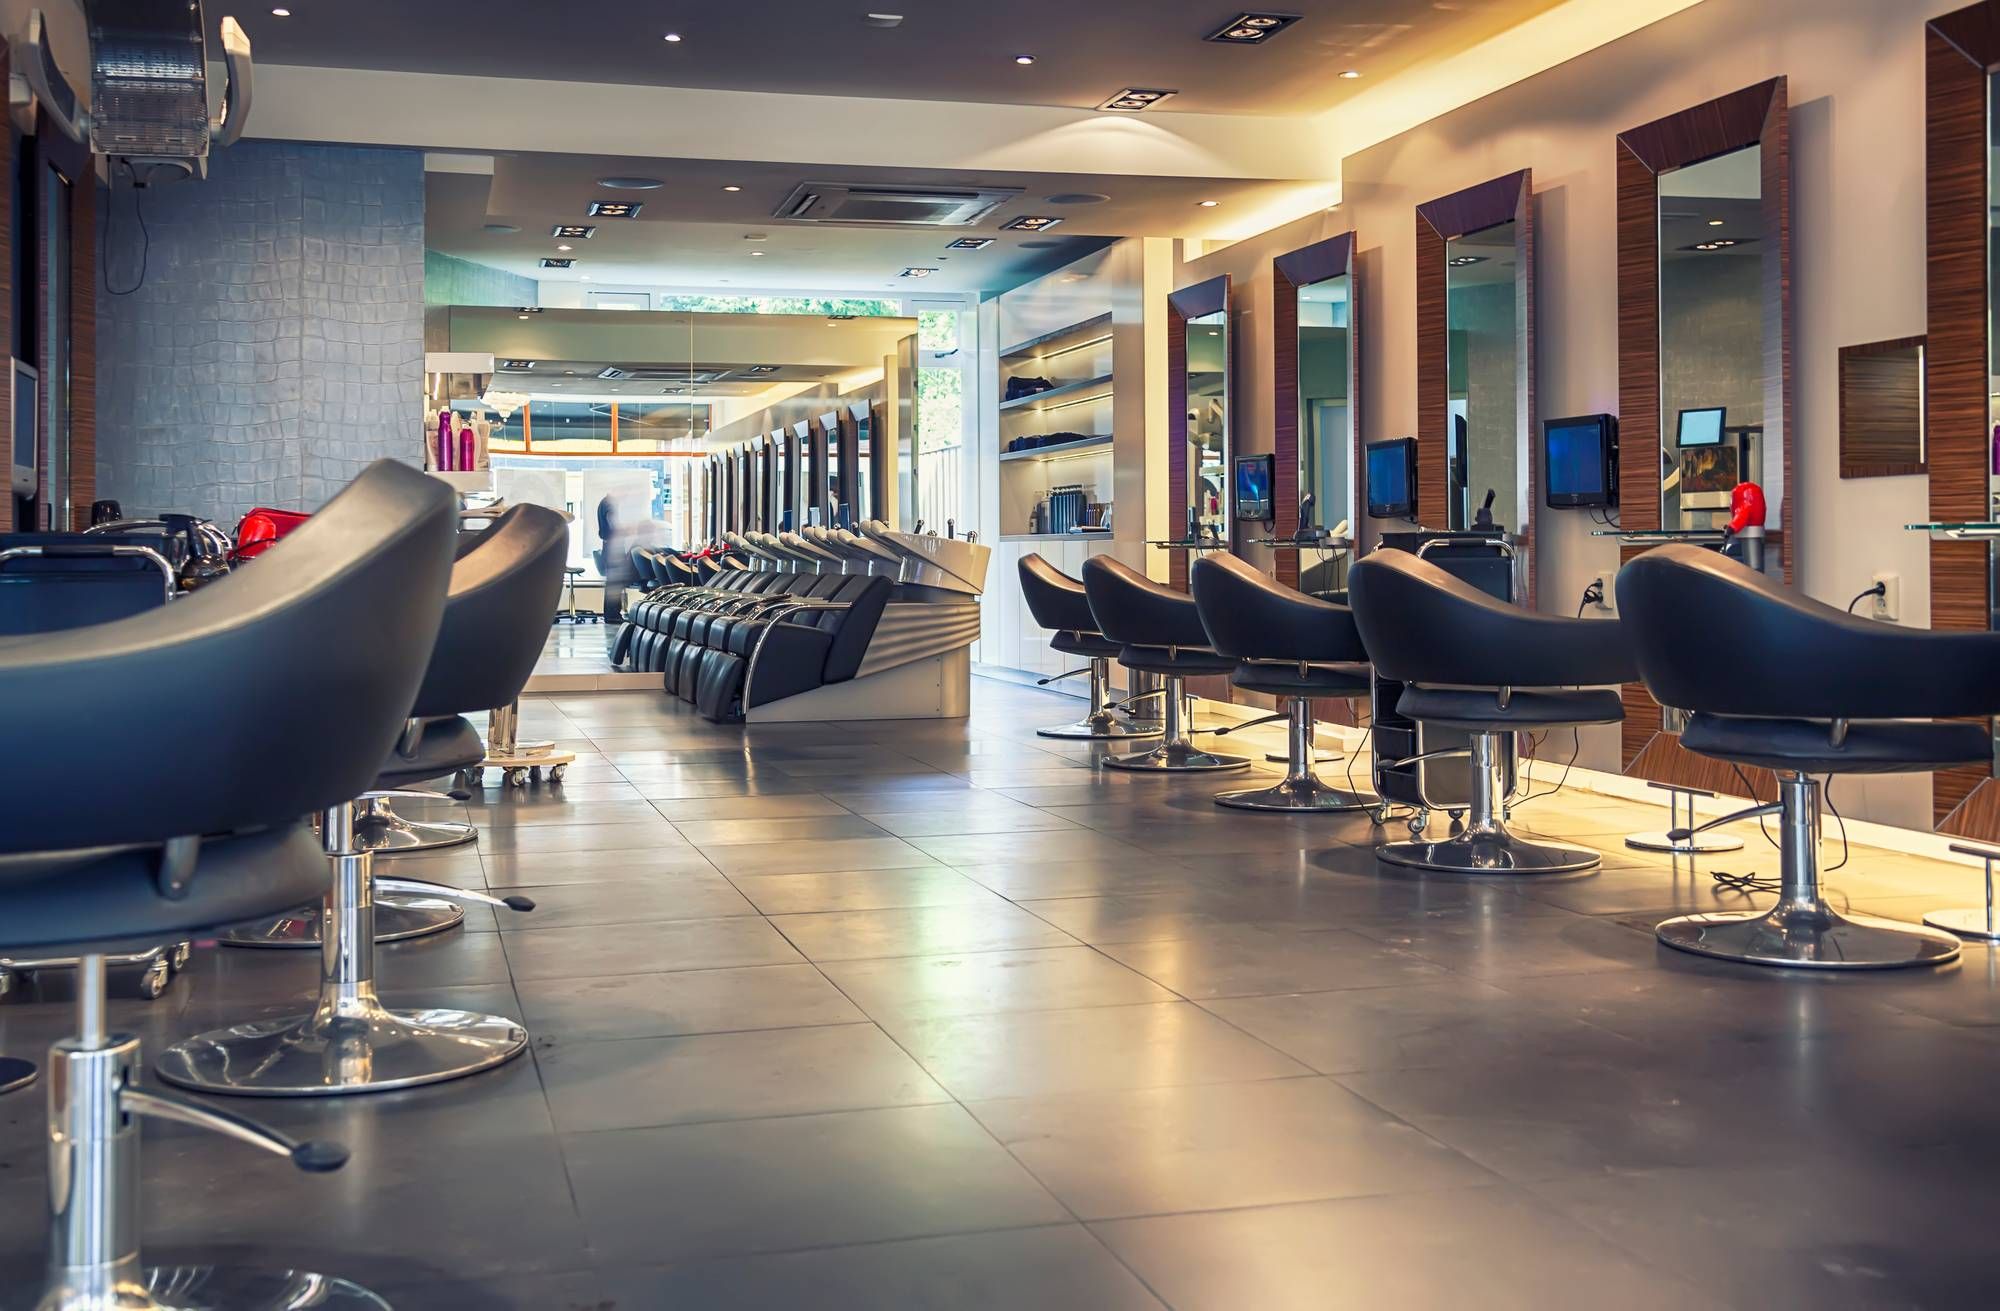 Hair salons in California argue that they should be allowed to open their locations.